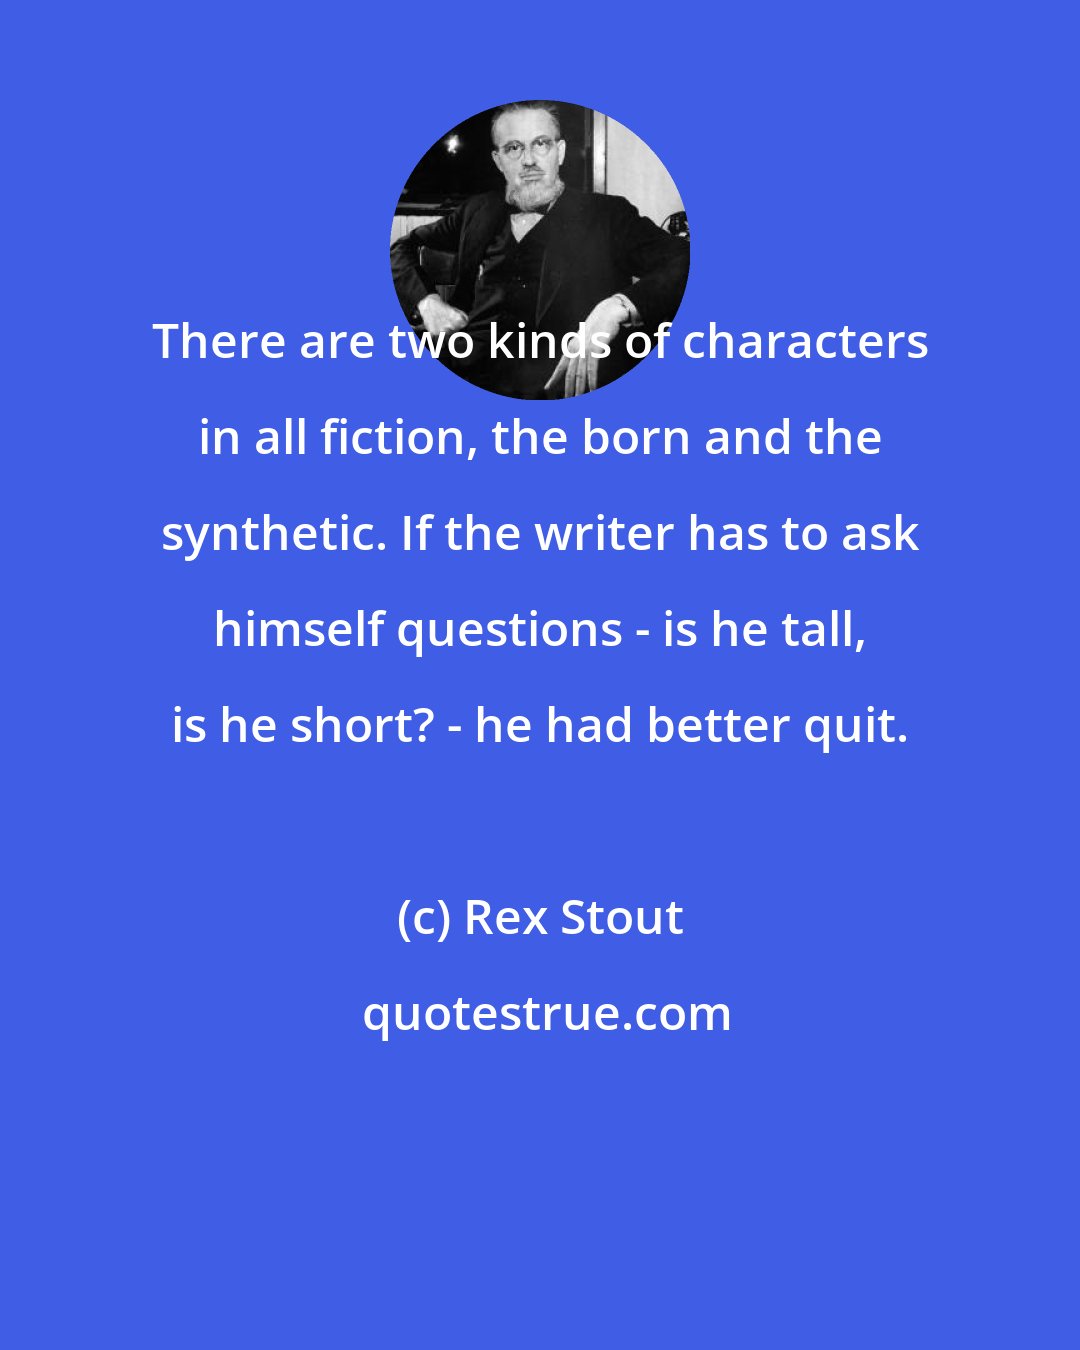 Rex Stout: There are two kinds of characters in all fiction, the born and the synthetic. If the writer has to ask himself questions - is he tall, is he short? - he had better quit.